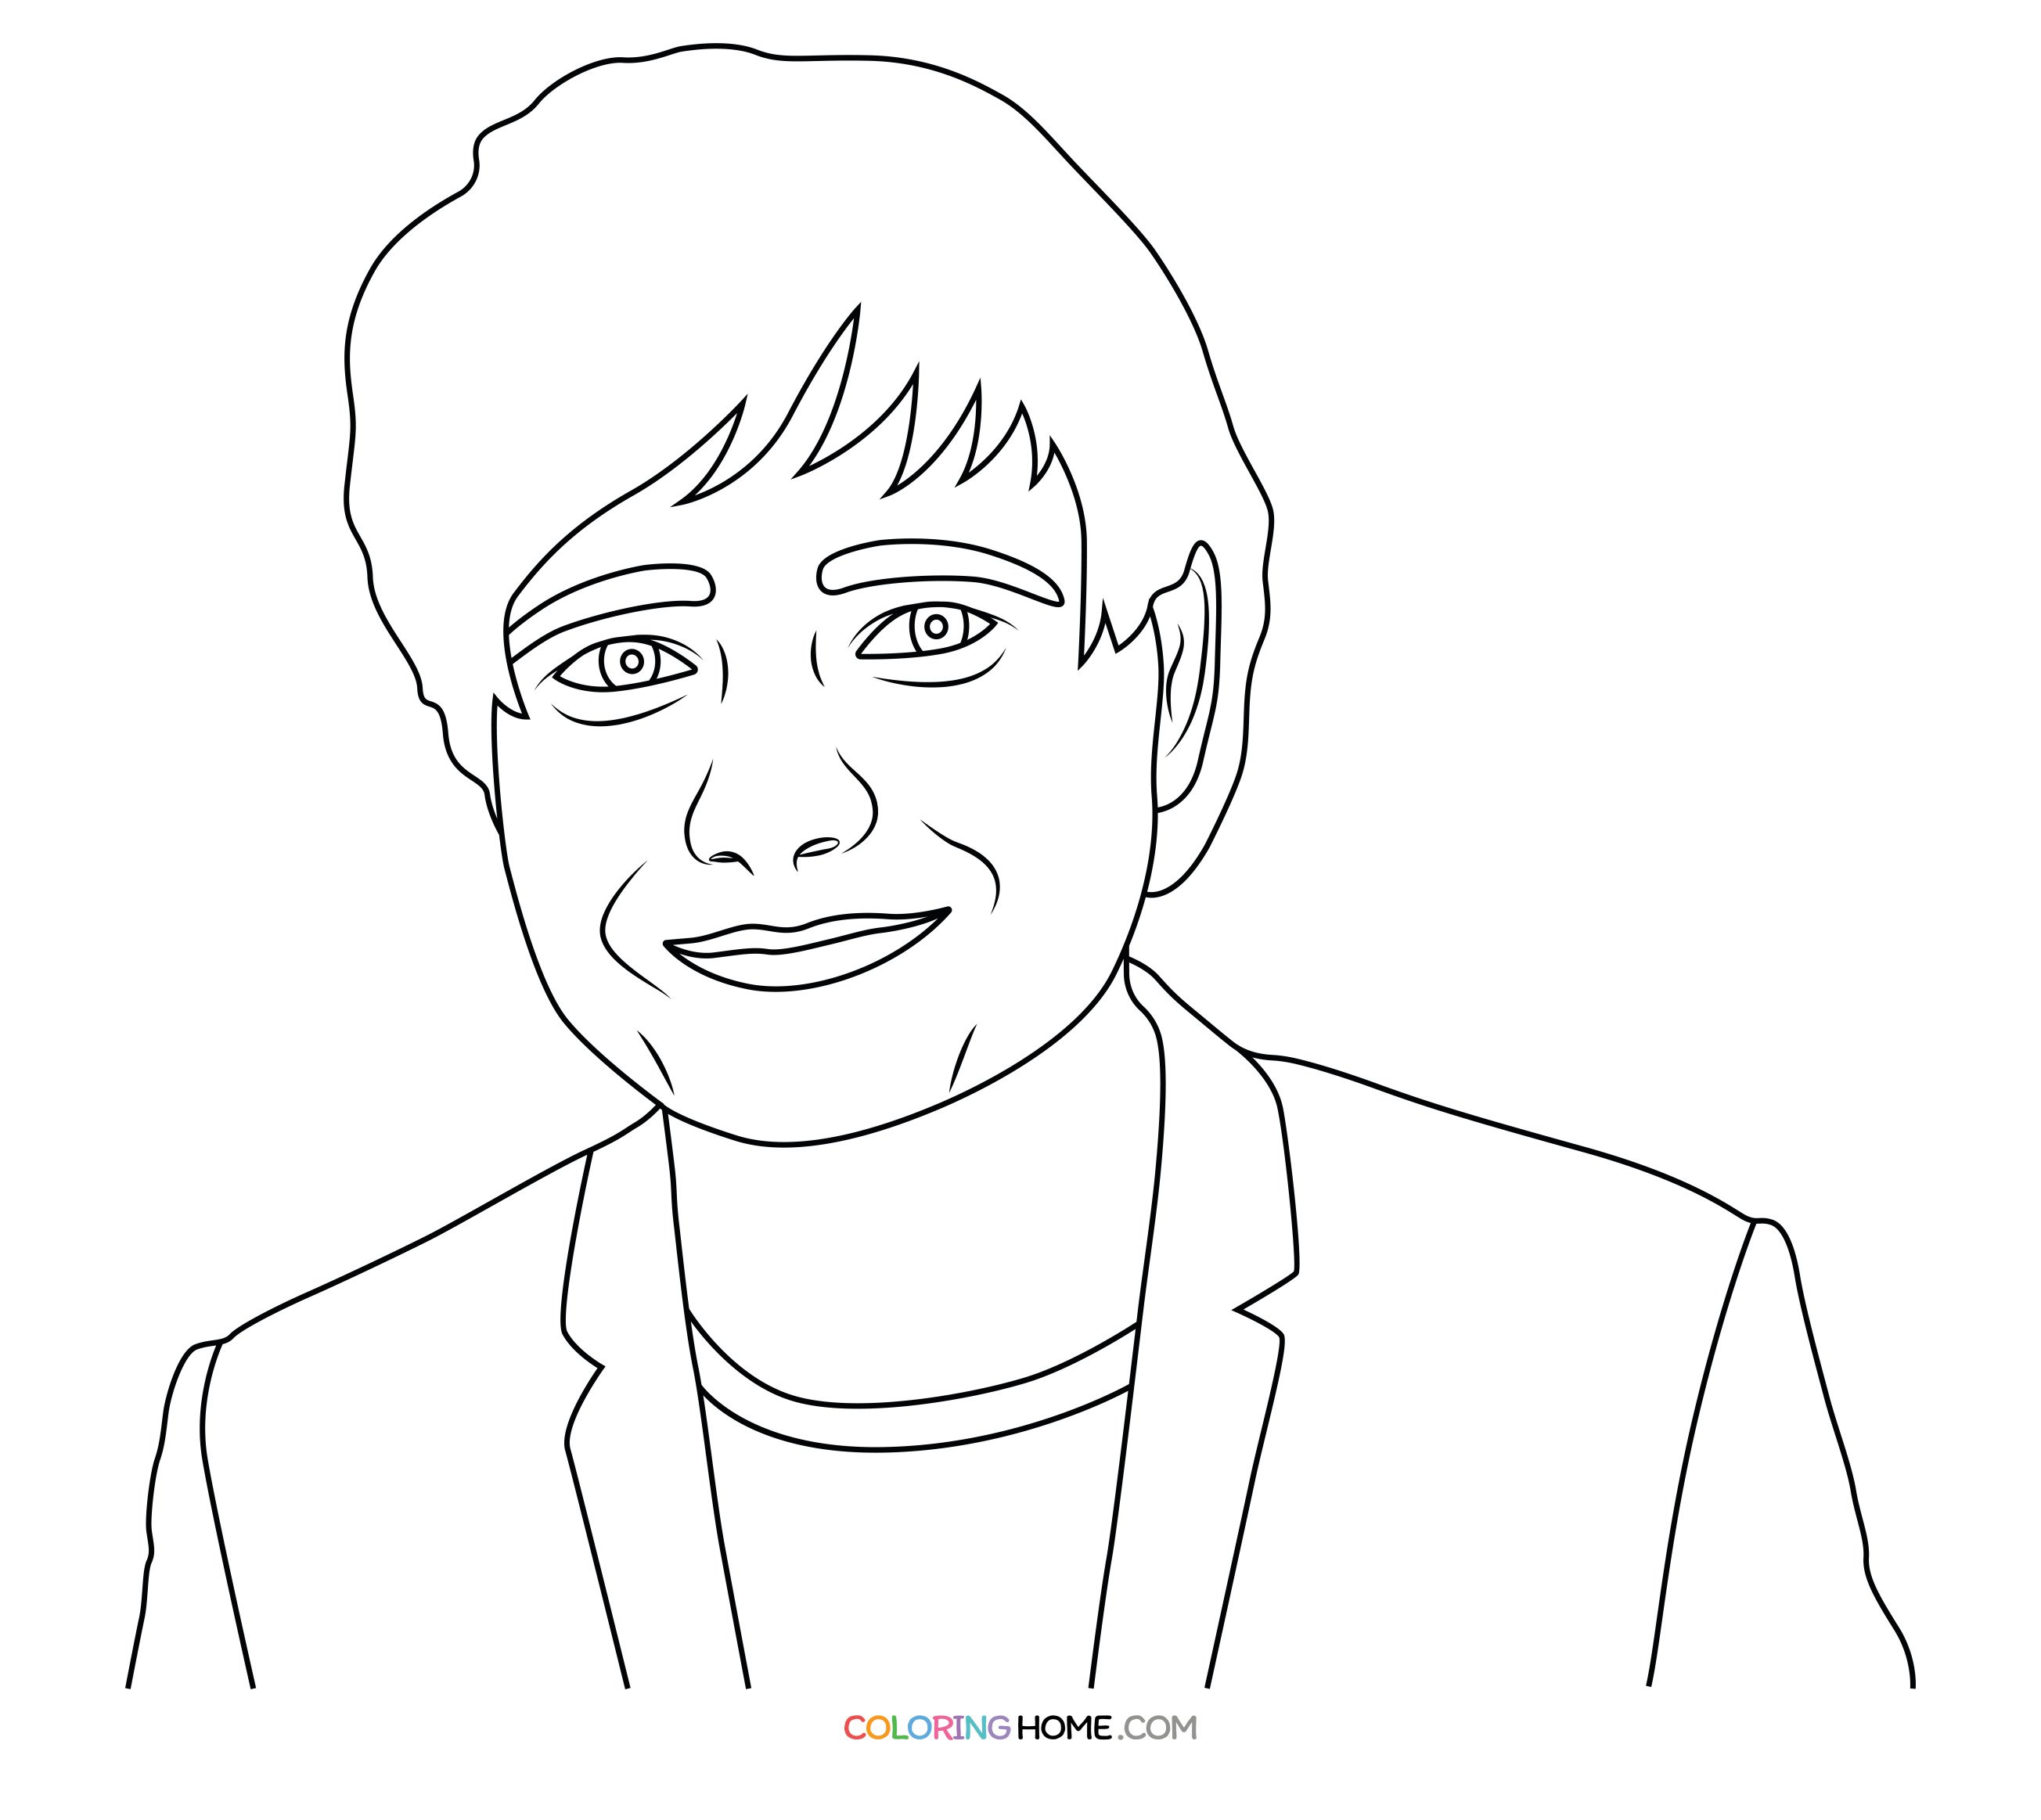 Ed Sheeran Coloring Pages - Coloring Home